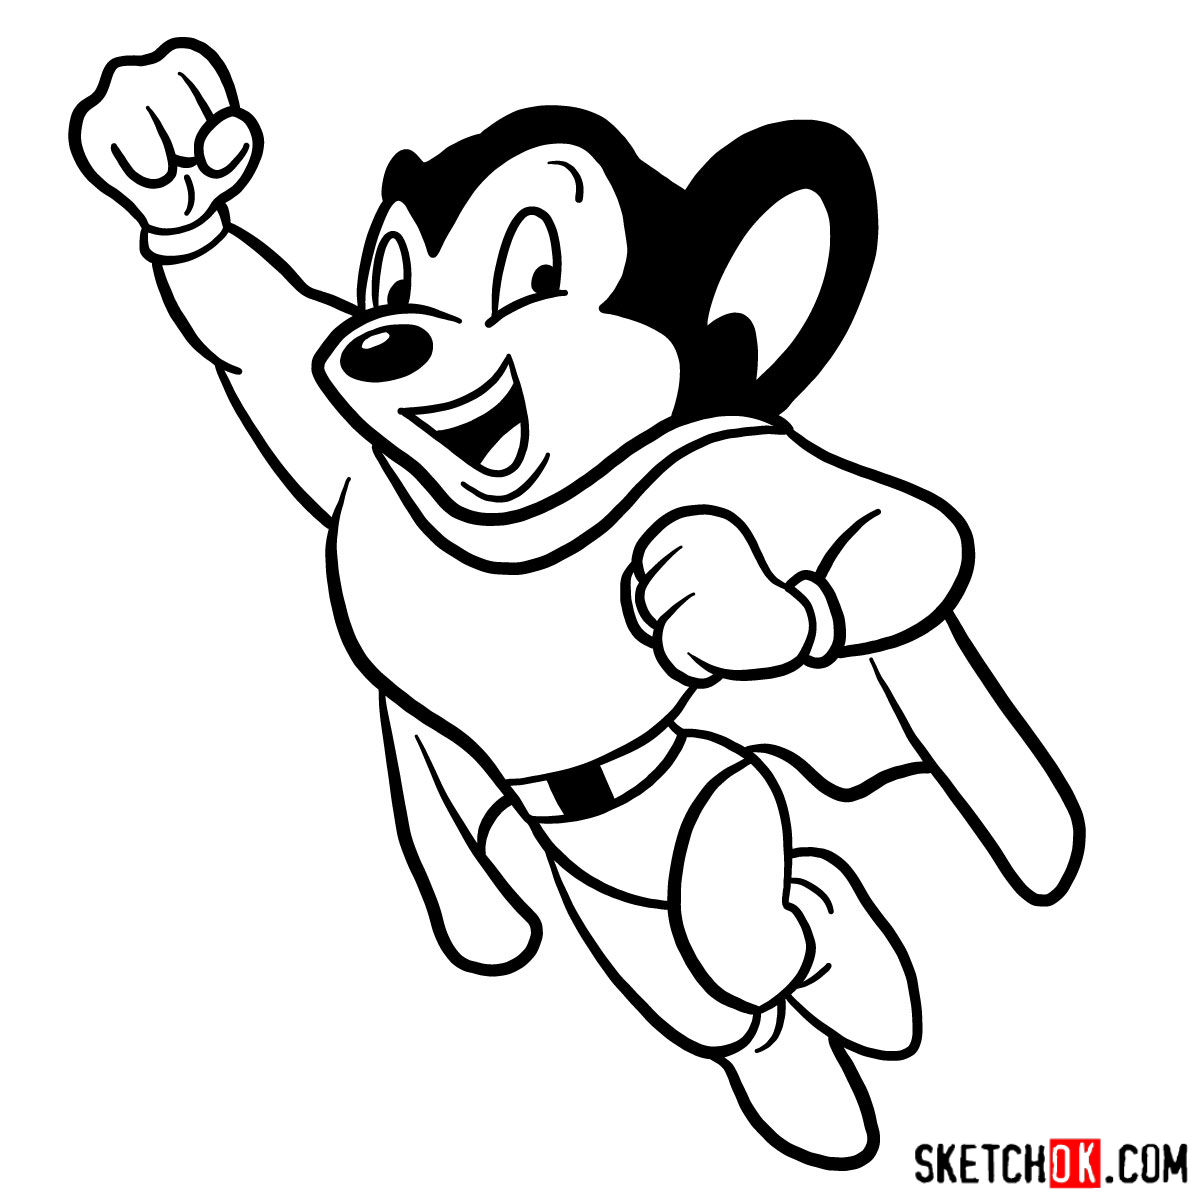 How to draw Mighty Mouse - step 11